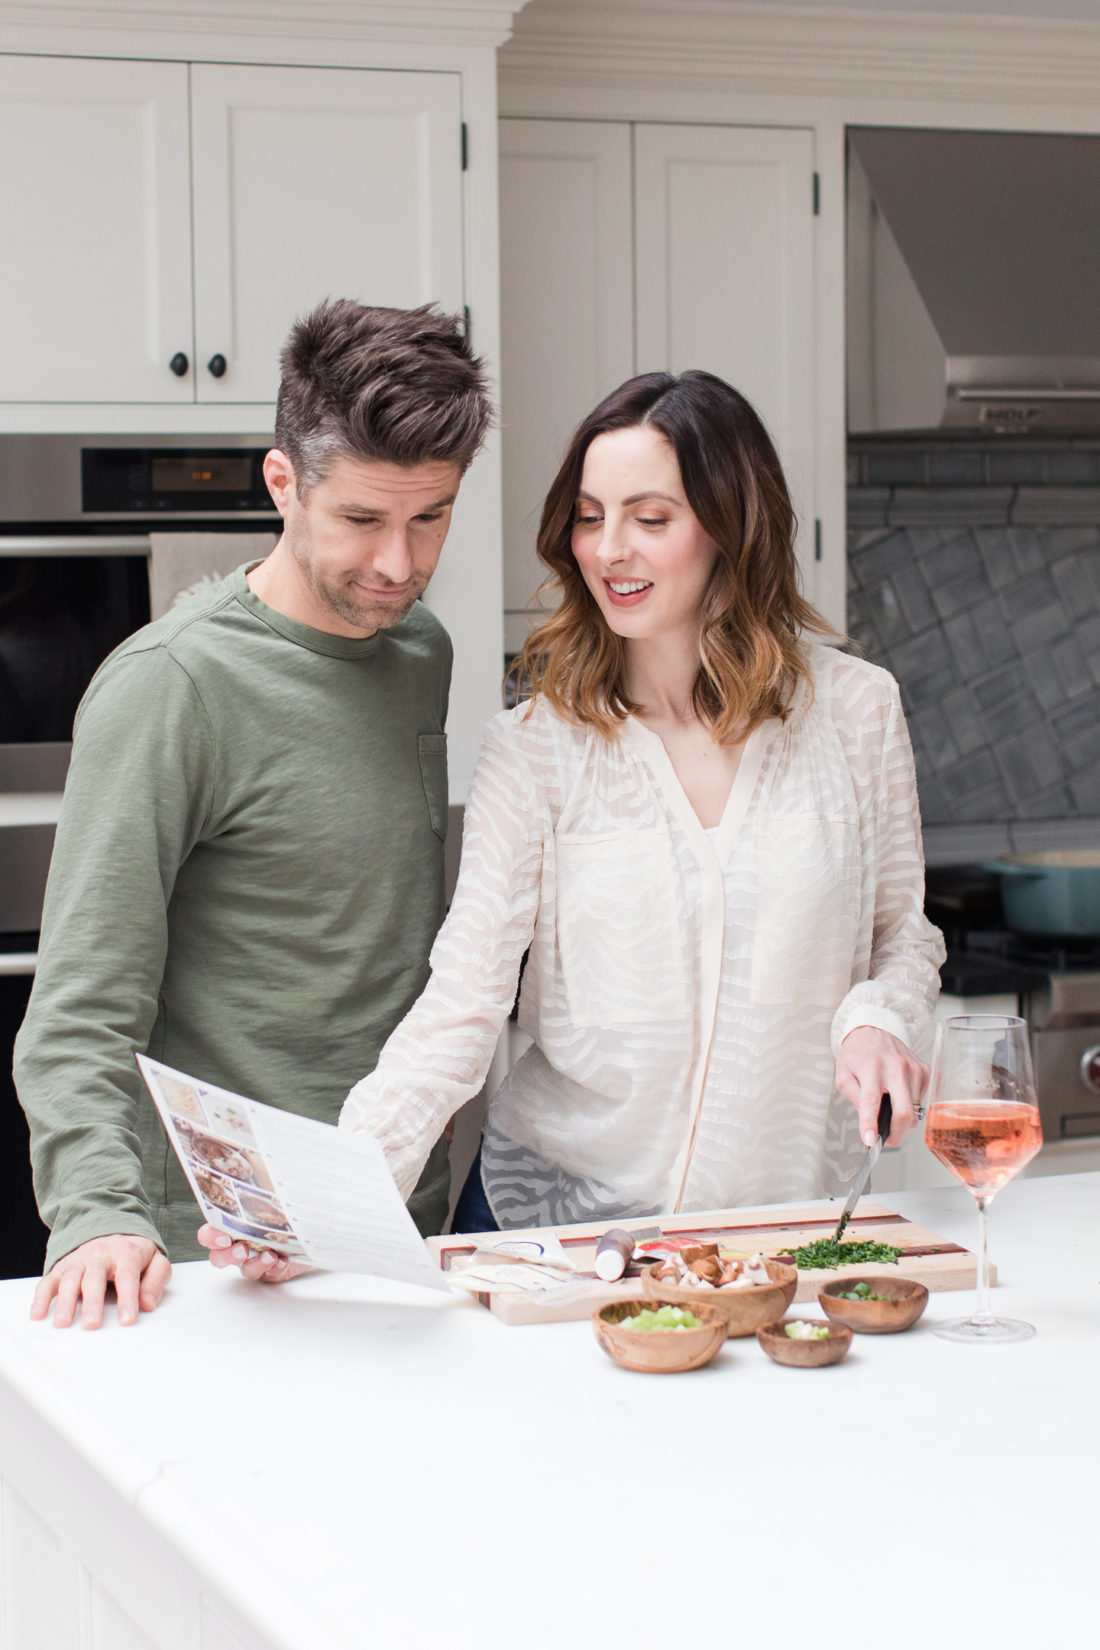 Eva Amurri Martino and Kyle Martino cook dinner together in the kitchen of their Connecticut home